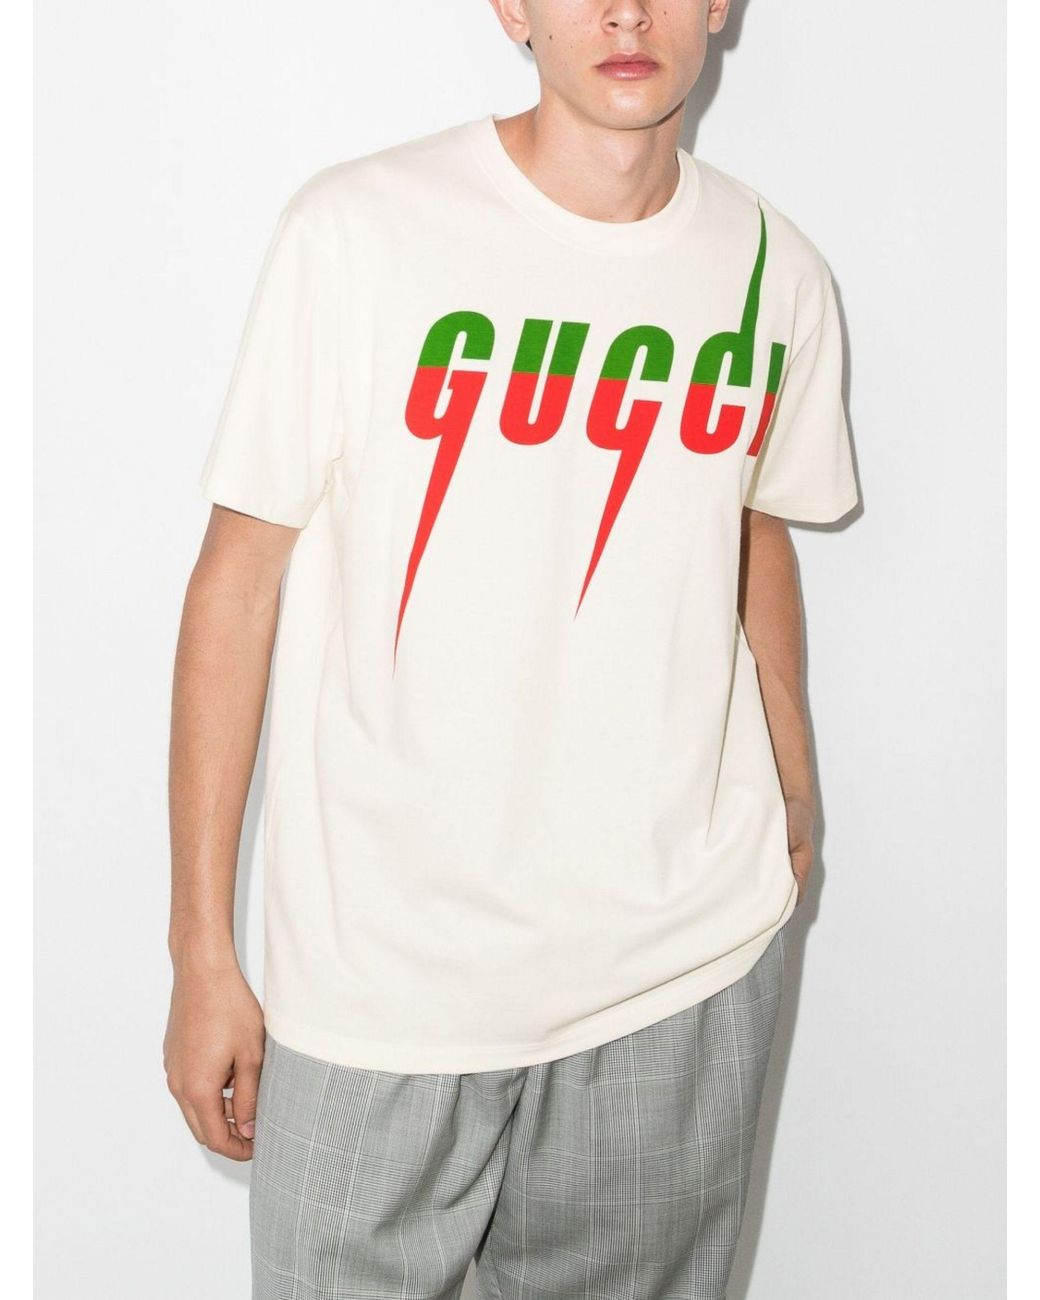 In honor cabbage Apartment Gucci Blade T-shirt for Men | Lyst